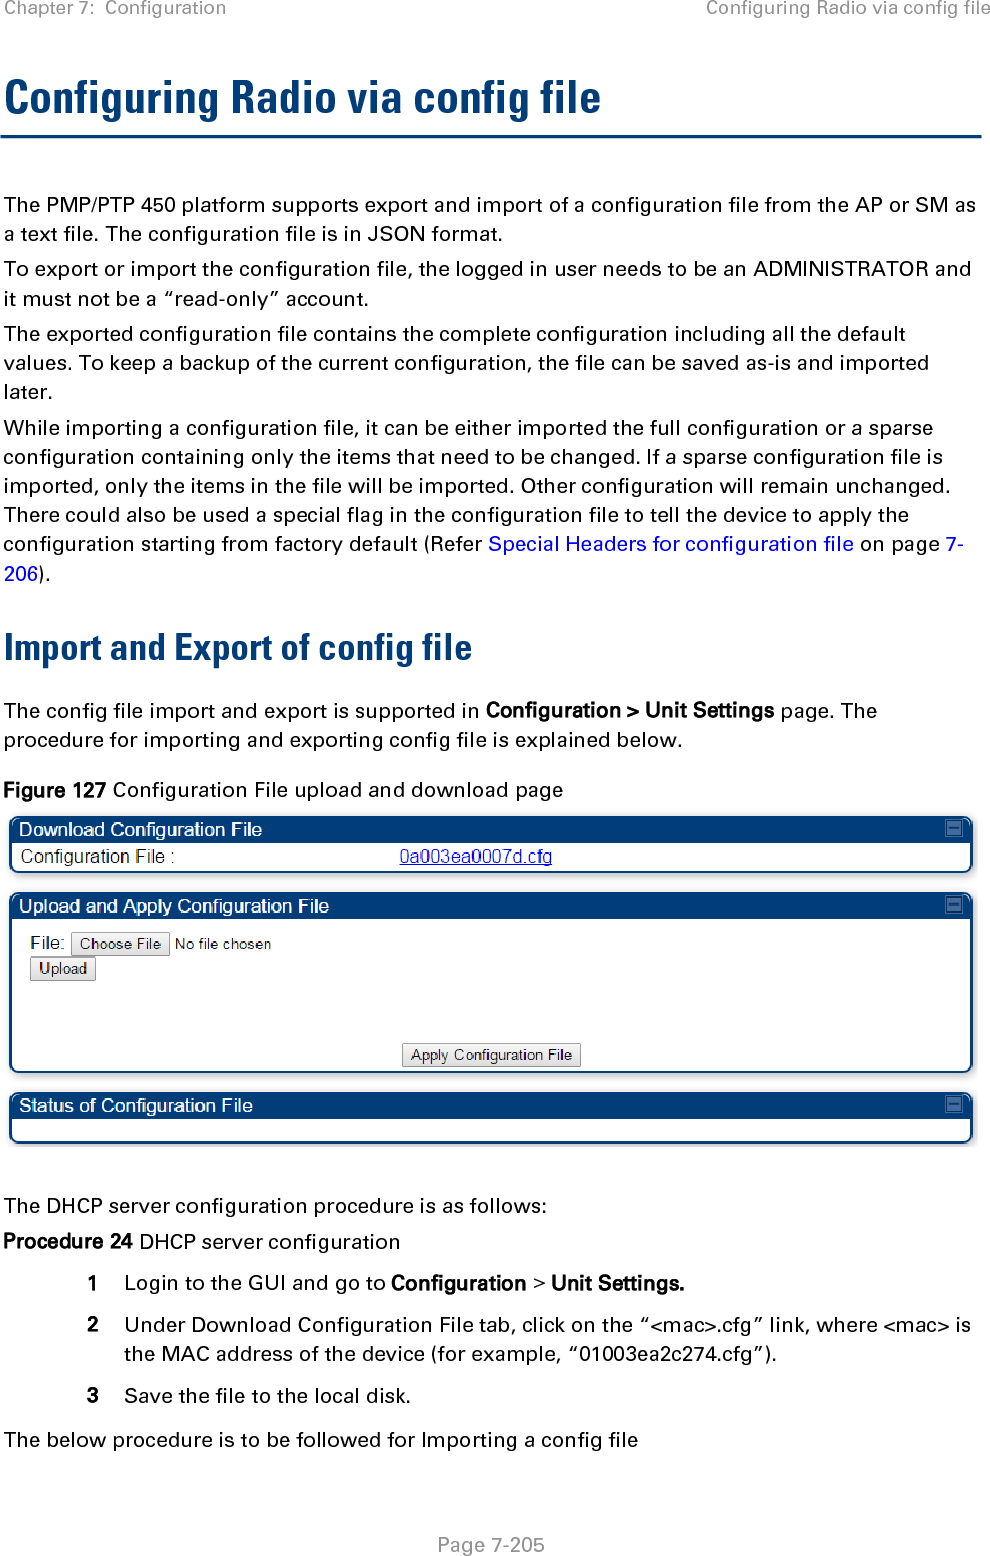 Chapter 7:  Configuration Configuring Radio via config file   Page 7-205 Configuring Radio via config file The PMP/PTP 450 platform supports export and import of a configuration file from the AP or SM as a text file. The configuration file is in JSON format.  To export or import the configuration file, the logged in user needs to be an ADMINISTRATOR and it must not be a “read-only” account.  The exported configuration file contains the complete configuration including all the default values. To keep a backup of the current configuration, the file can be saved as-is and imported later. While importing a configuration file, it can be either imported the full configuration or a sparse configuration containing only the items that need to be changed. If a sparse configuration file is imported, only the items in the file will be imported. Other configuration will remain unchanged. There could also be used a special flag in the configuration file to tell the device to apply the configuration starting from factory default (Refer Special Headers for configuration file on page 7-206). Import and Export of config file The config file import and export is supported in Configuration &gt; Unit Settings page. The procedure for importing and exporting config file is explained below. Figure 127 Configuration File upload and download page   The DHCP server configuration procedure is as follows: Procedure 24 DHCP server configuration 1 Login to the GUI and go to Configuration &gt; Unit Settings.  2 Under Download Configuration File tab, click on the “&lt;mac&gt;.cfg” link, where &lt;mac&gt; is the MAC address of the device (for example, “01003ea2c274.cfg”). 3 Save the file to the local disk. The below procedure is to be followed for Importing a config file 